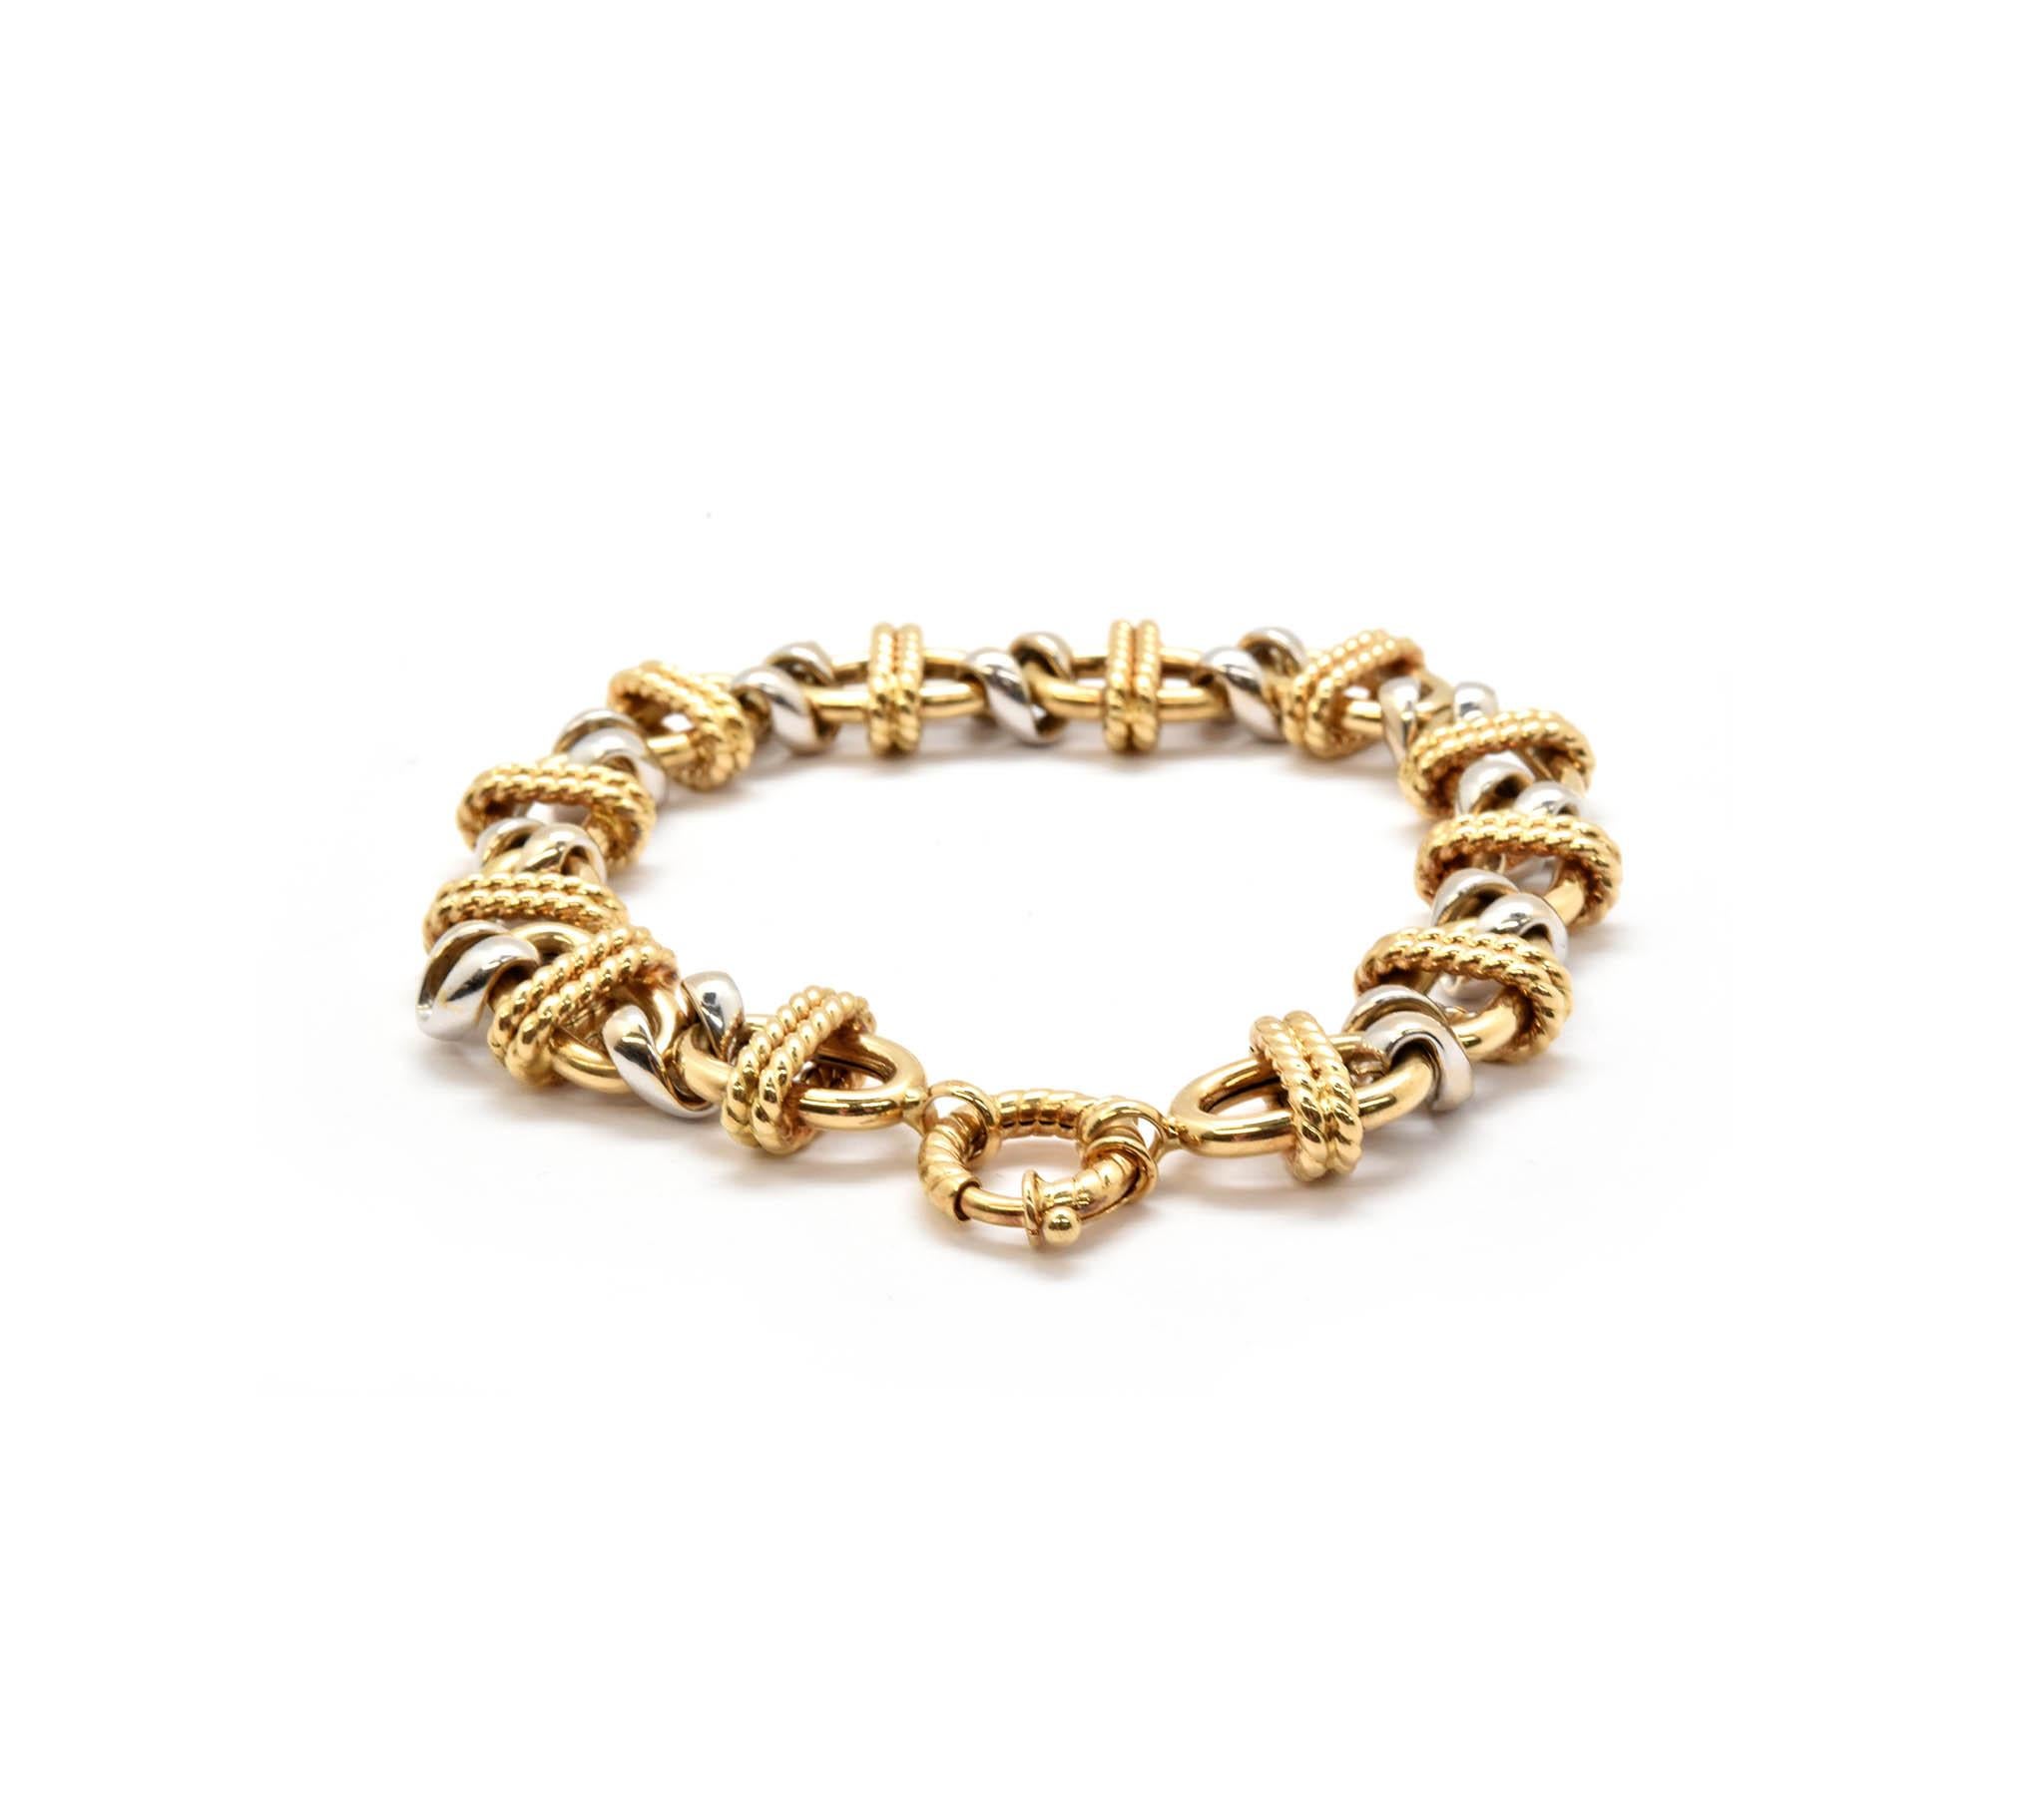 Modern Gents Two-Tone 18 Karat Yellow and White Gold Fancy Rope Link Style Bracelet